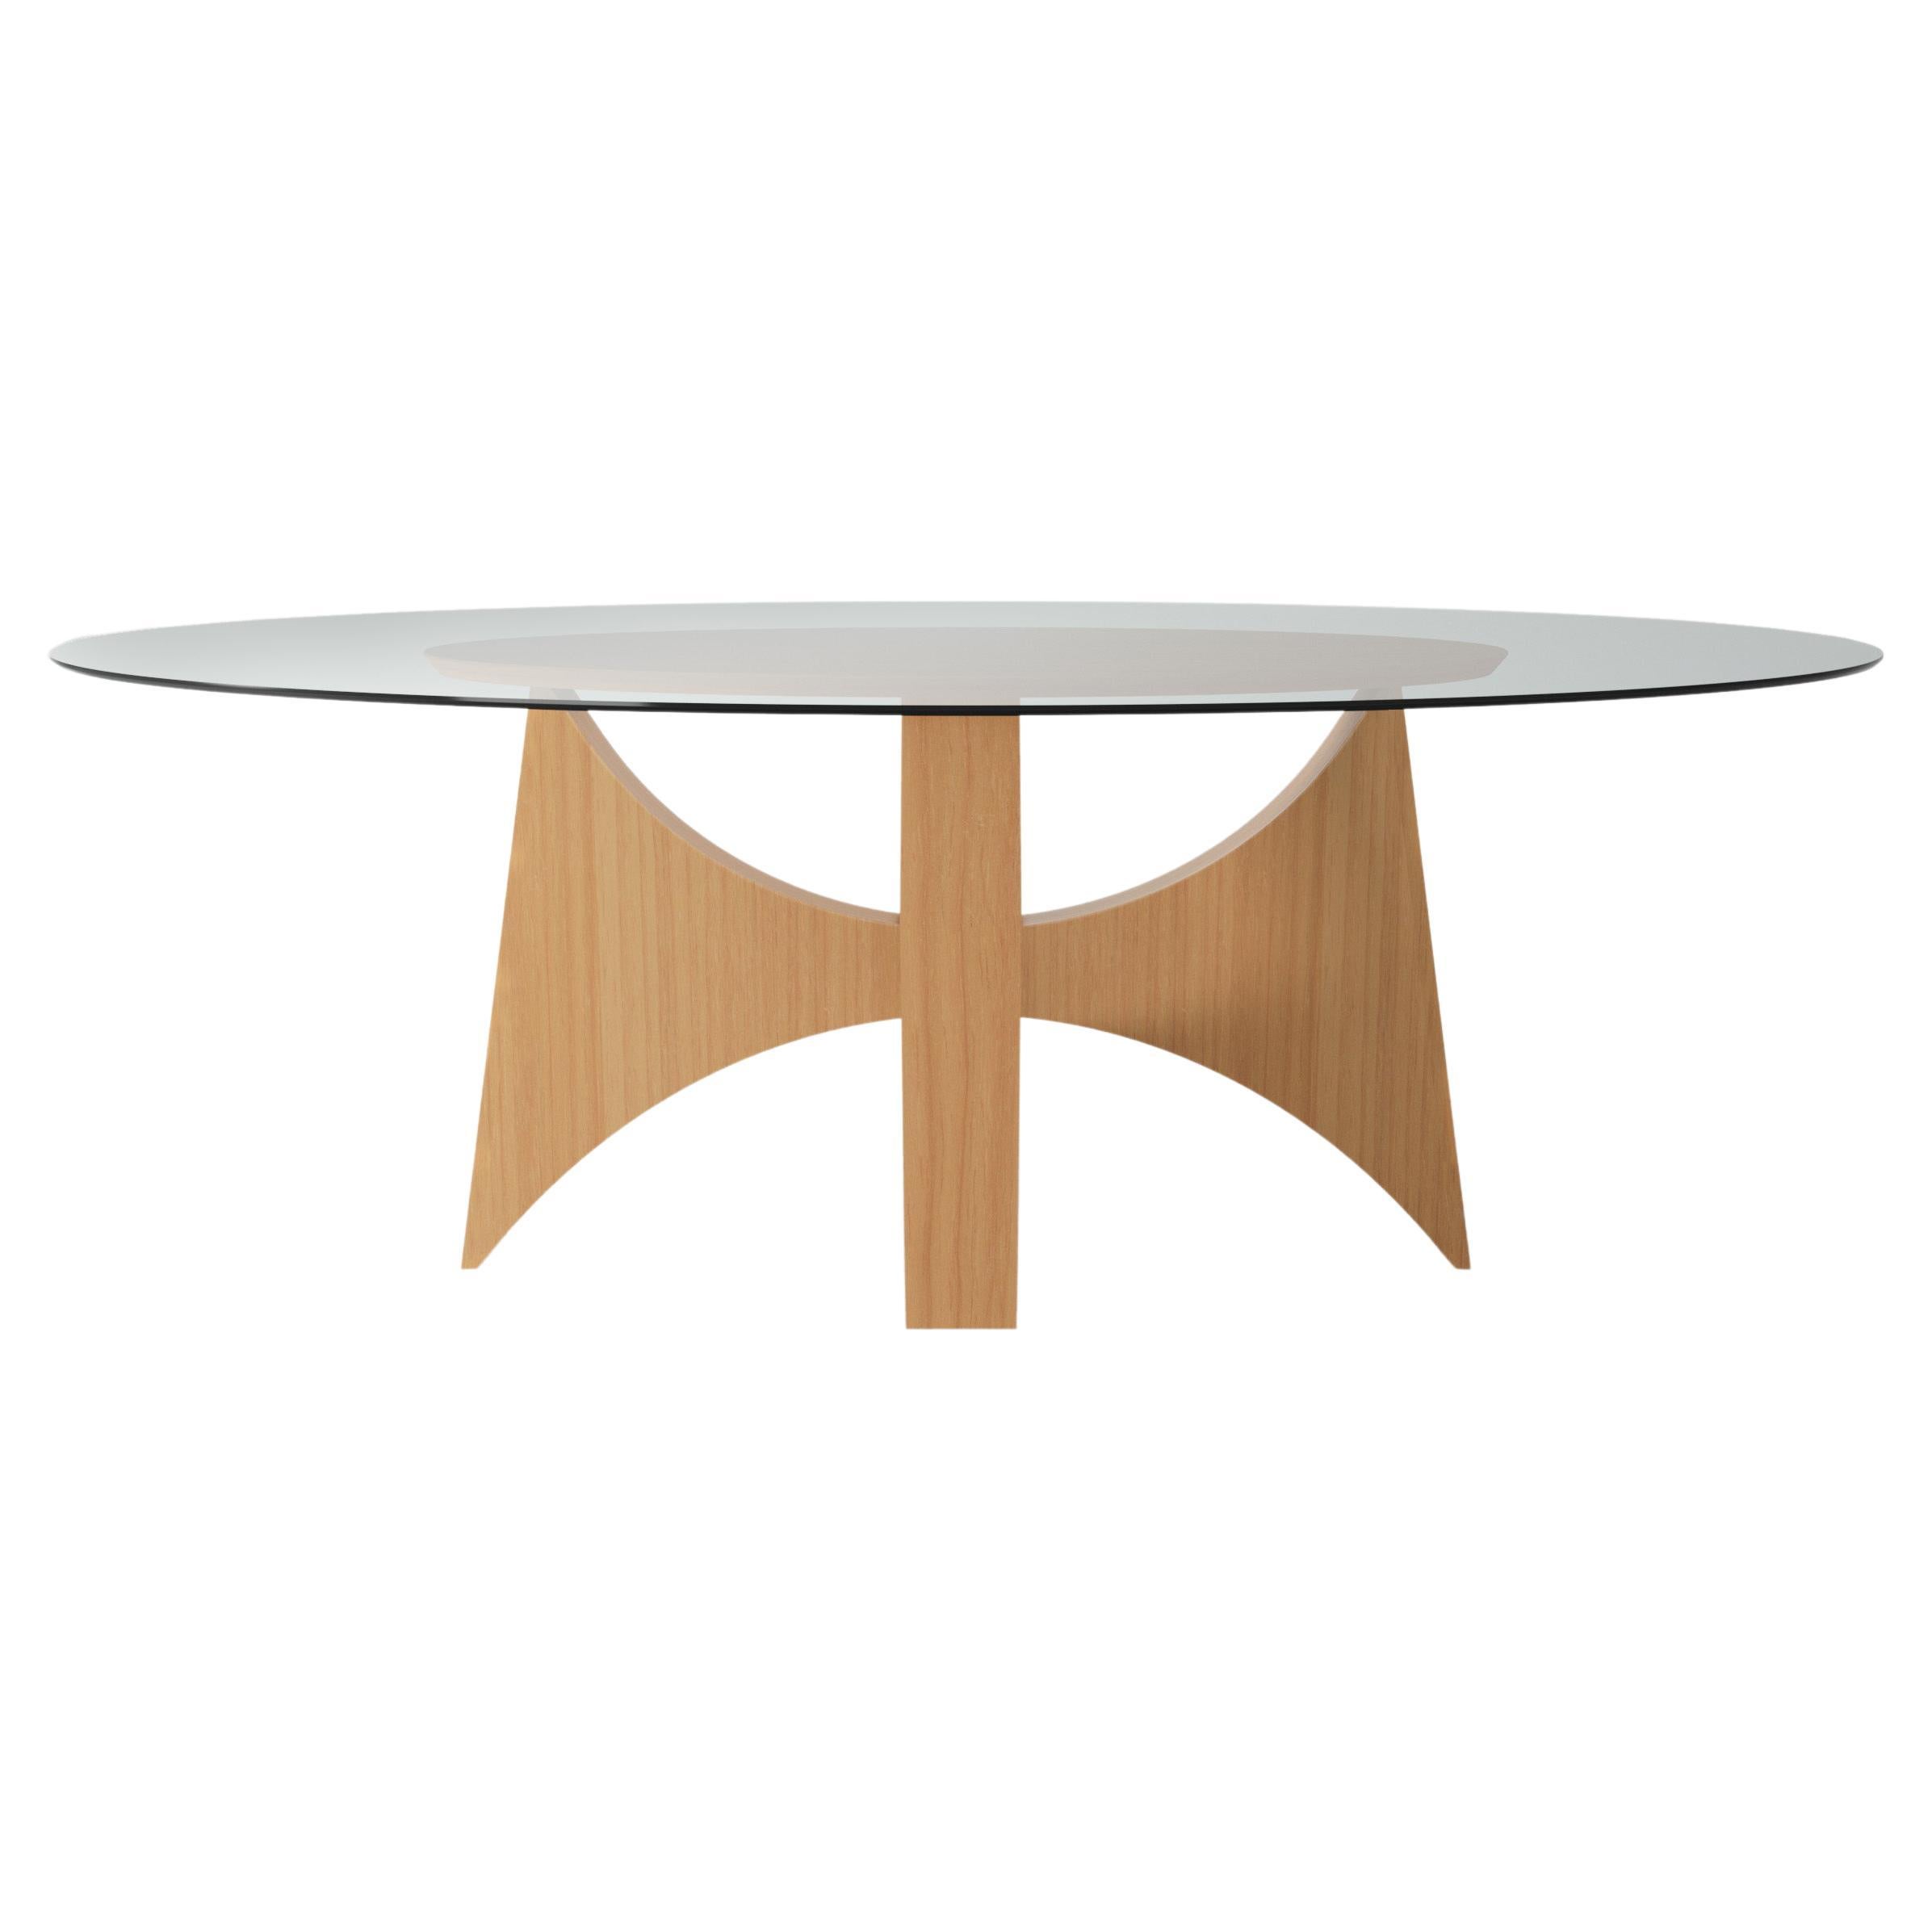 Planalto Dining Table For Sale